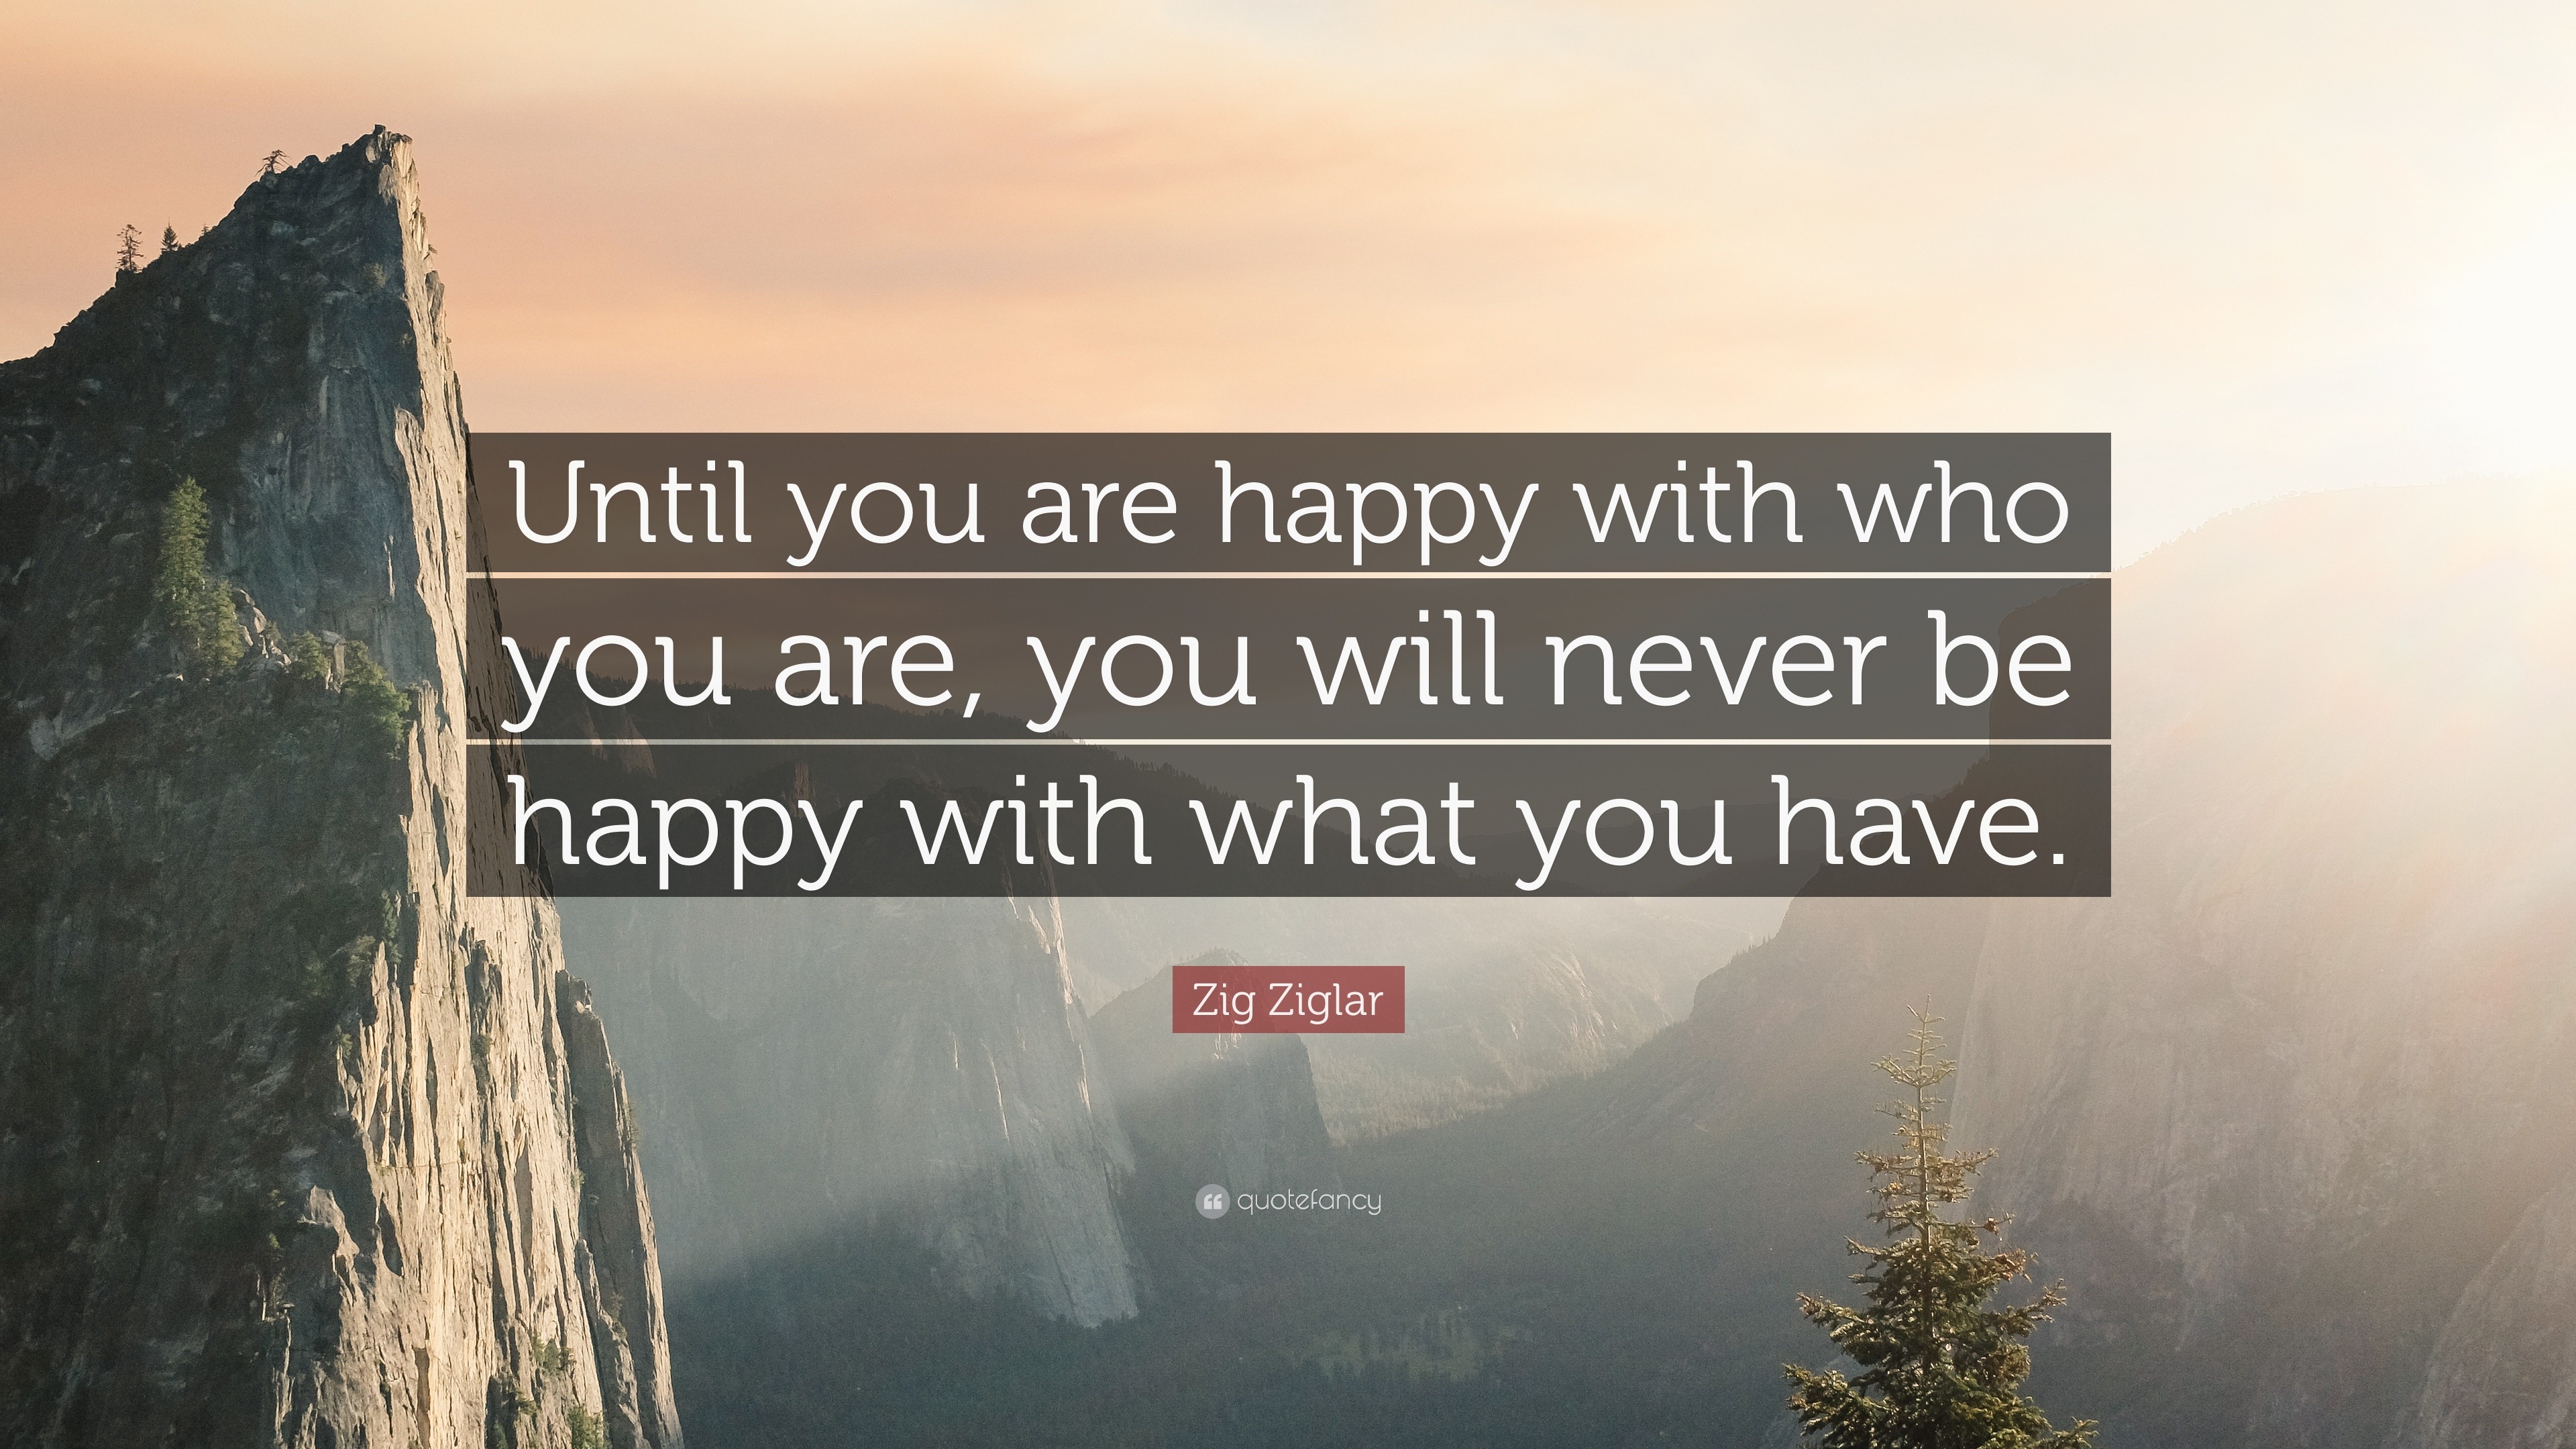 Zig Ziglar Quote: "Until you are happy with who you are ...